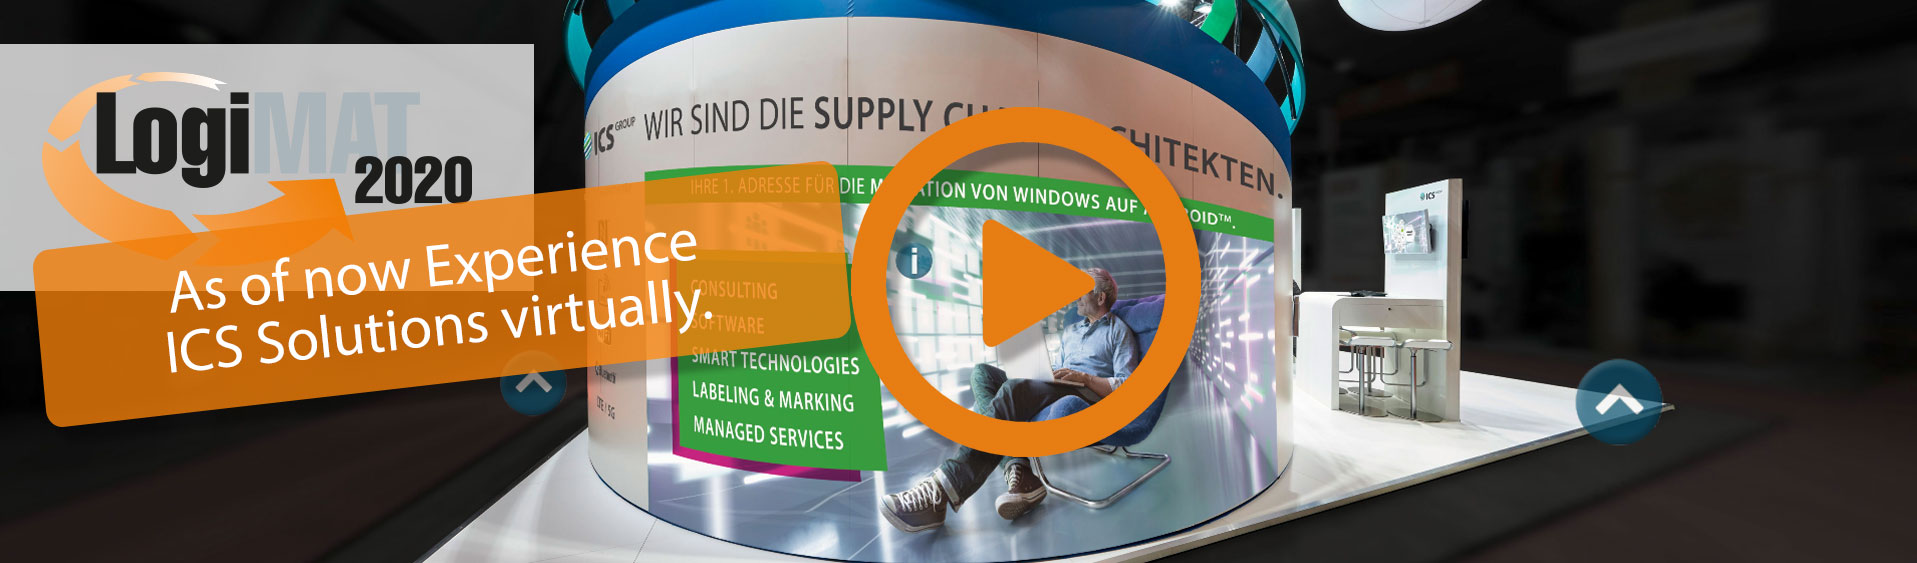 Experience the ICS Group at the virtual LogiMAT trade fair booth.